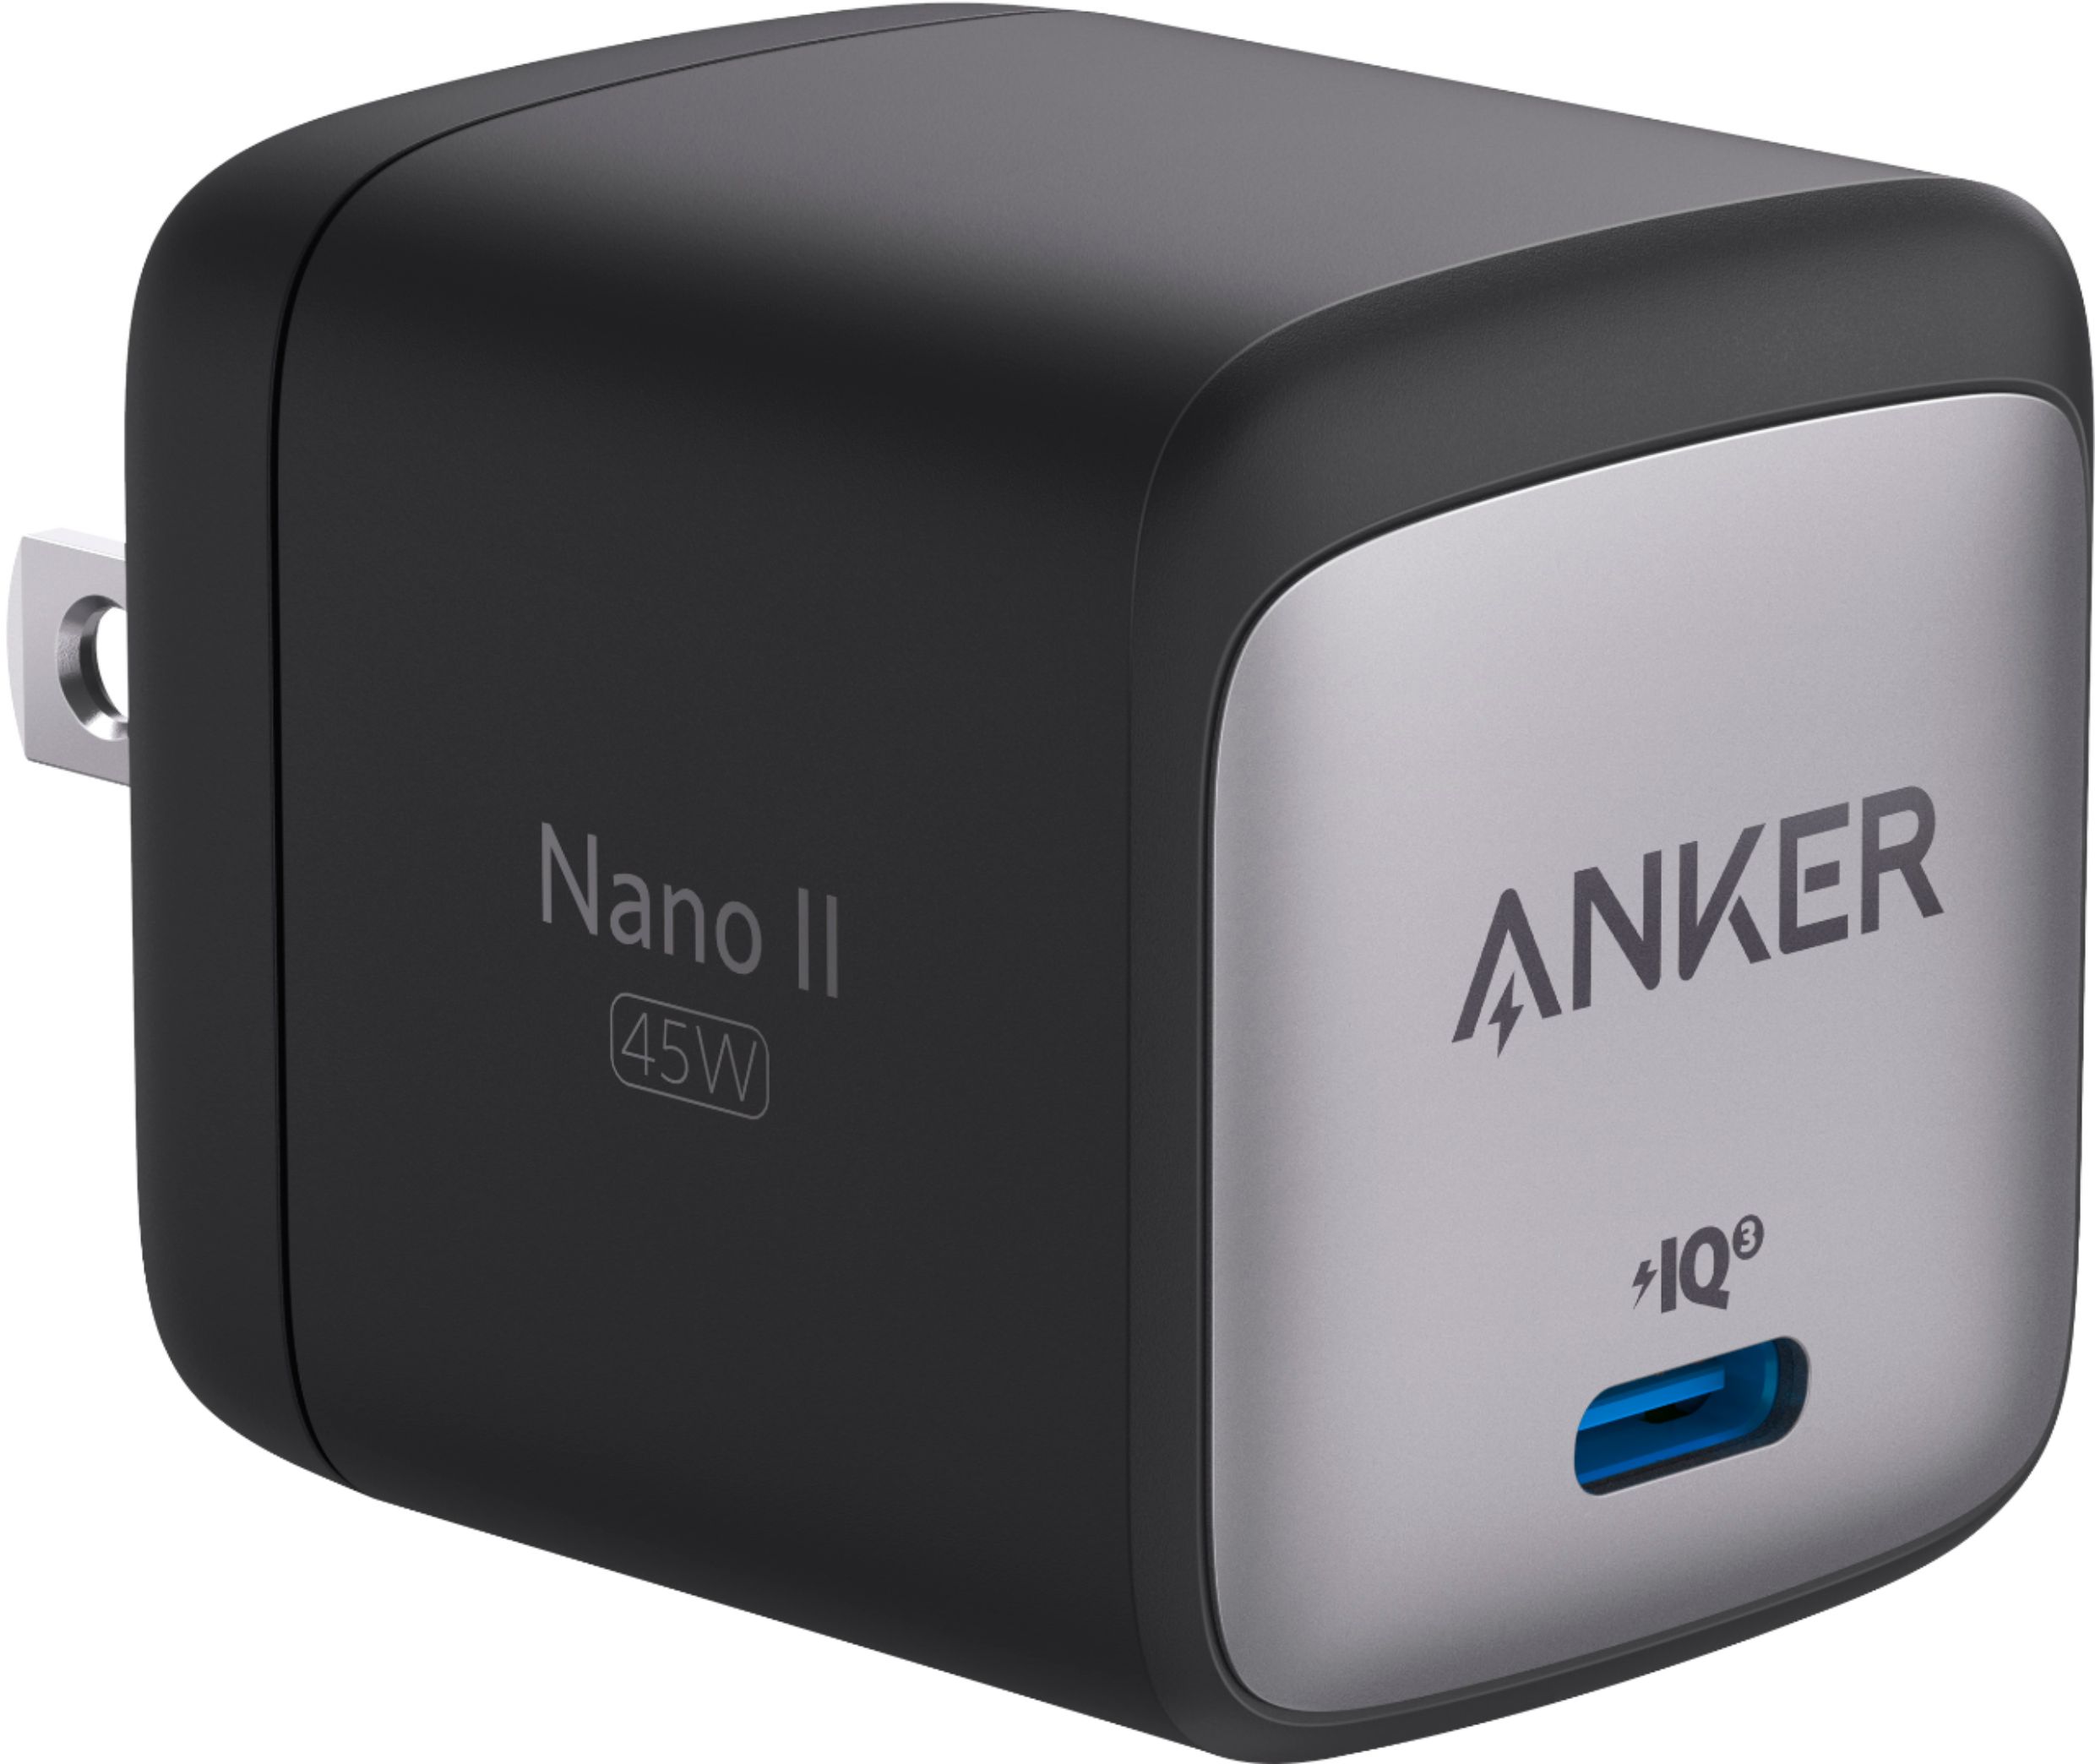 Anker's Nano II USB-C Chargers Pack Up to 65W of Power in a Smaller Design  - MacRumors